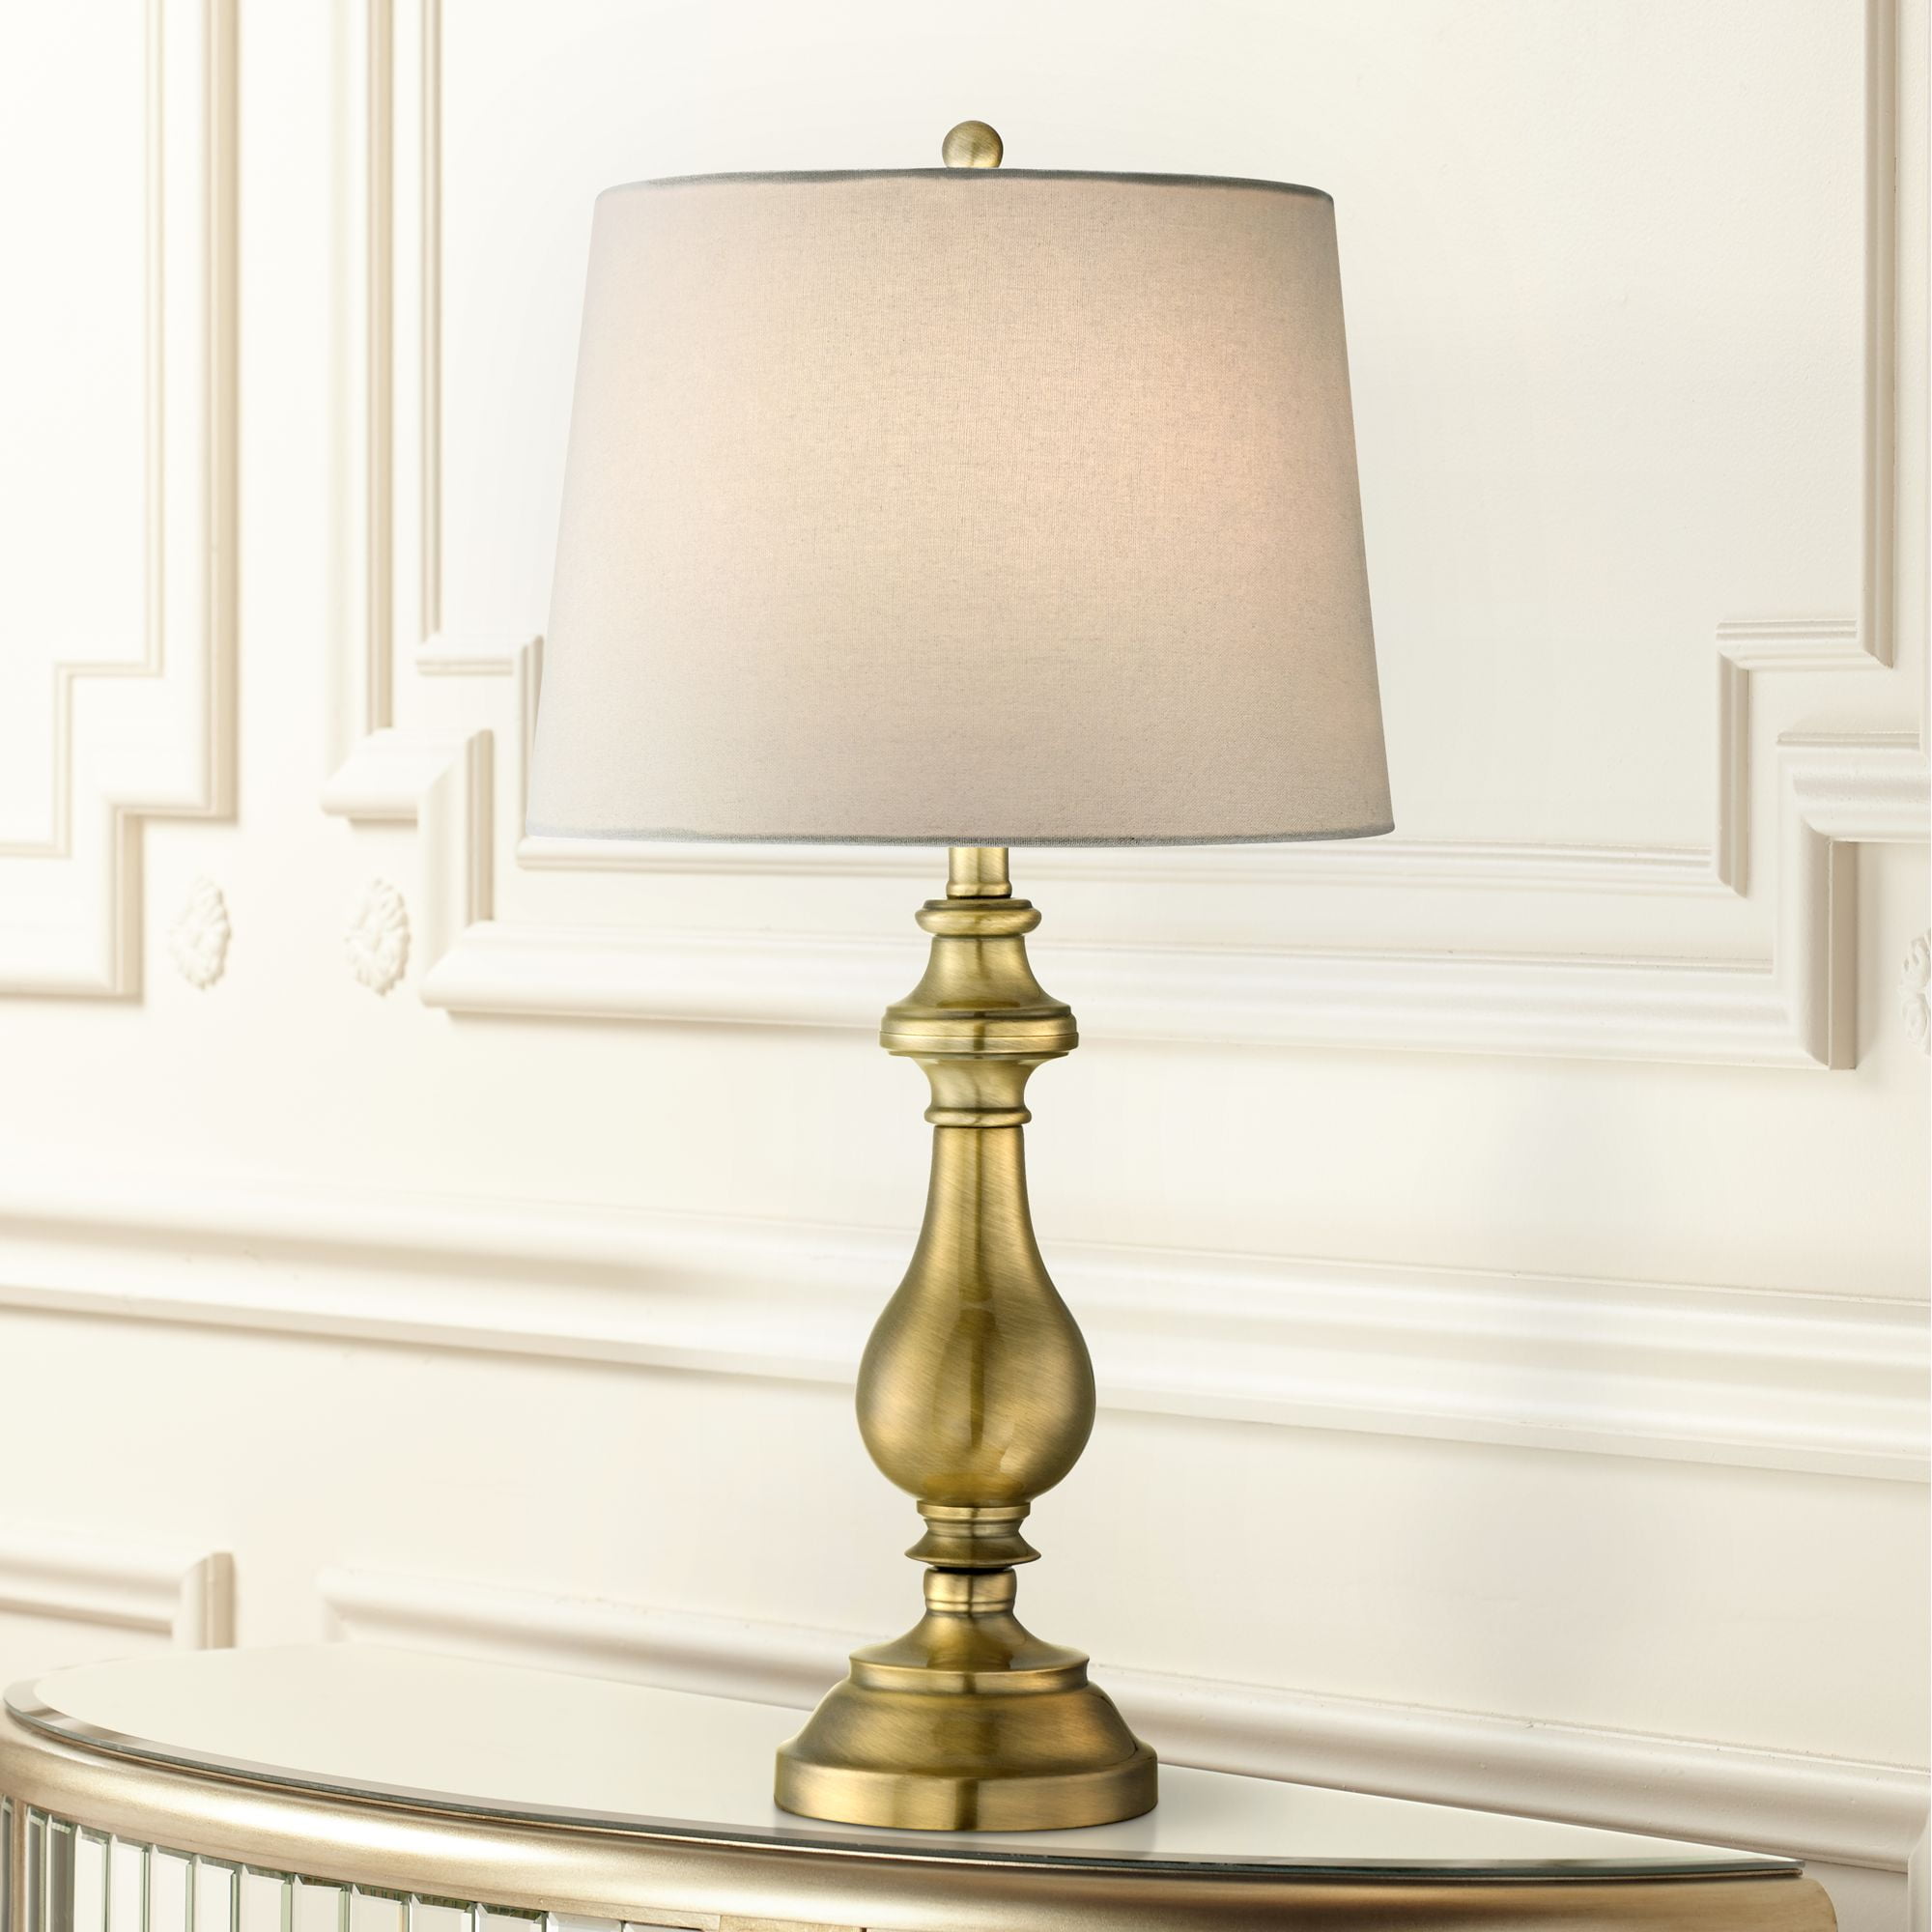 Regency Hill Traditional Table Lamp 26, Antique Brass Table Lamp Shade